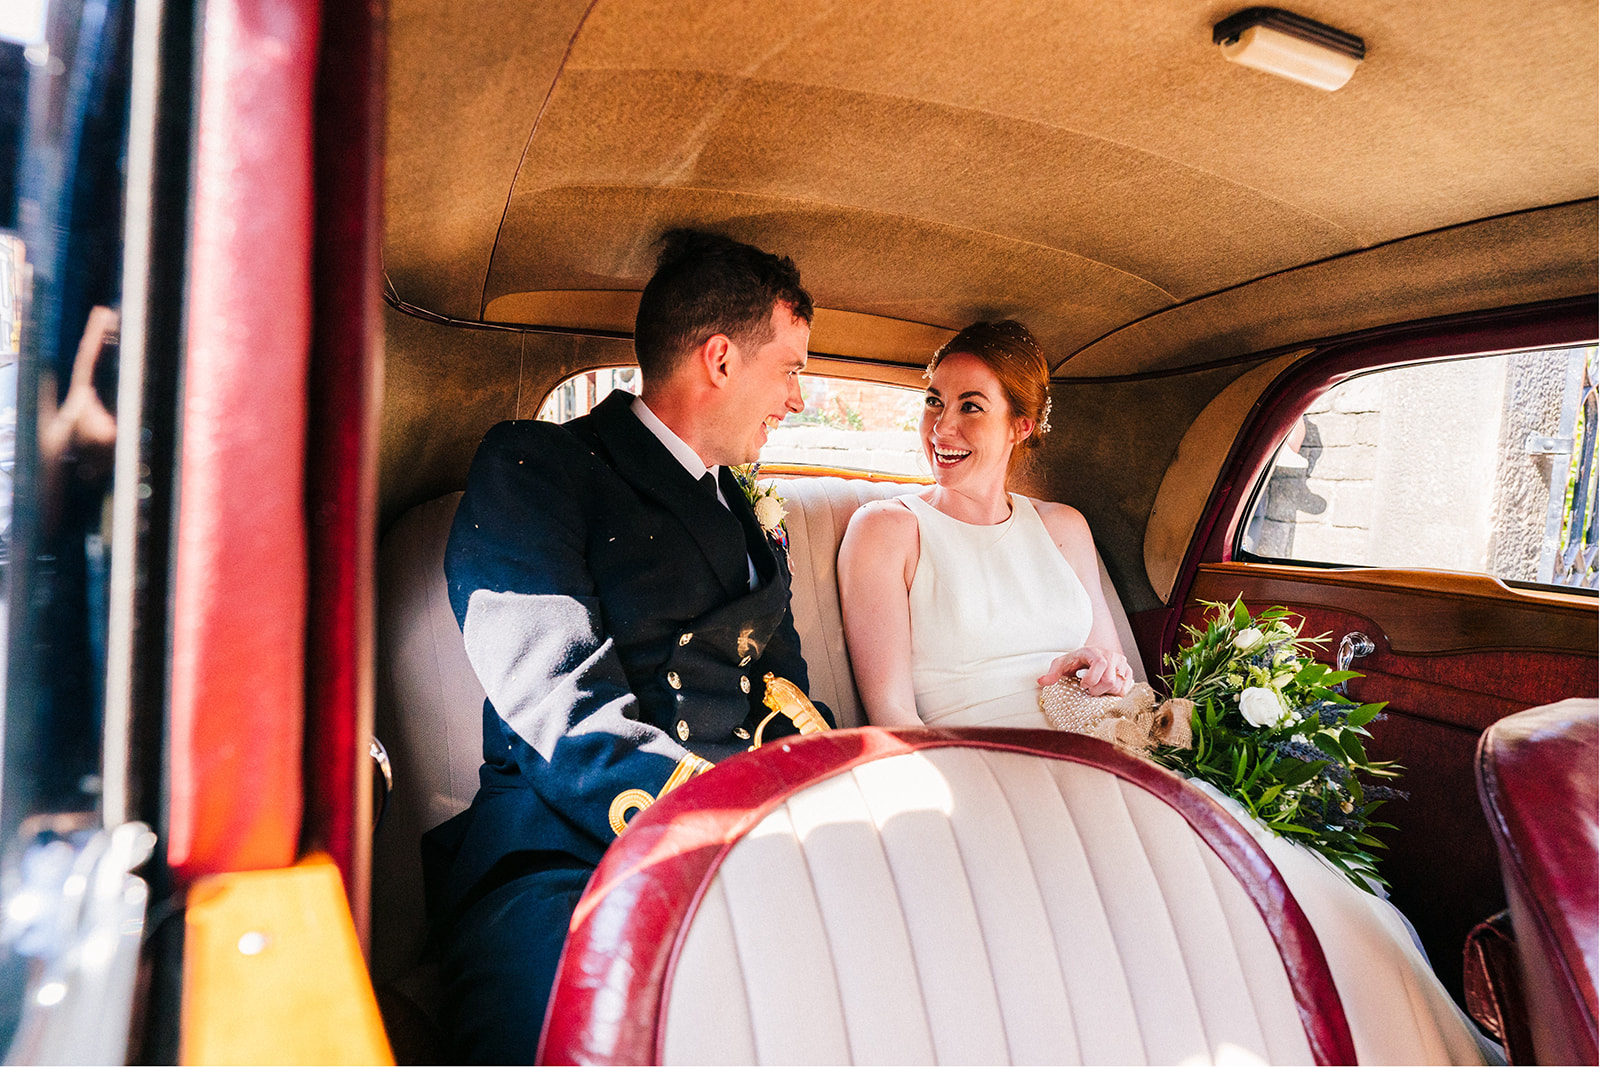 Derby DIY Farm Wedding Photography - bride and groom looking at each other and smiling in the Wedding car
